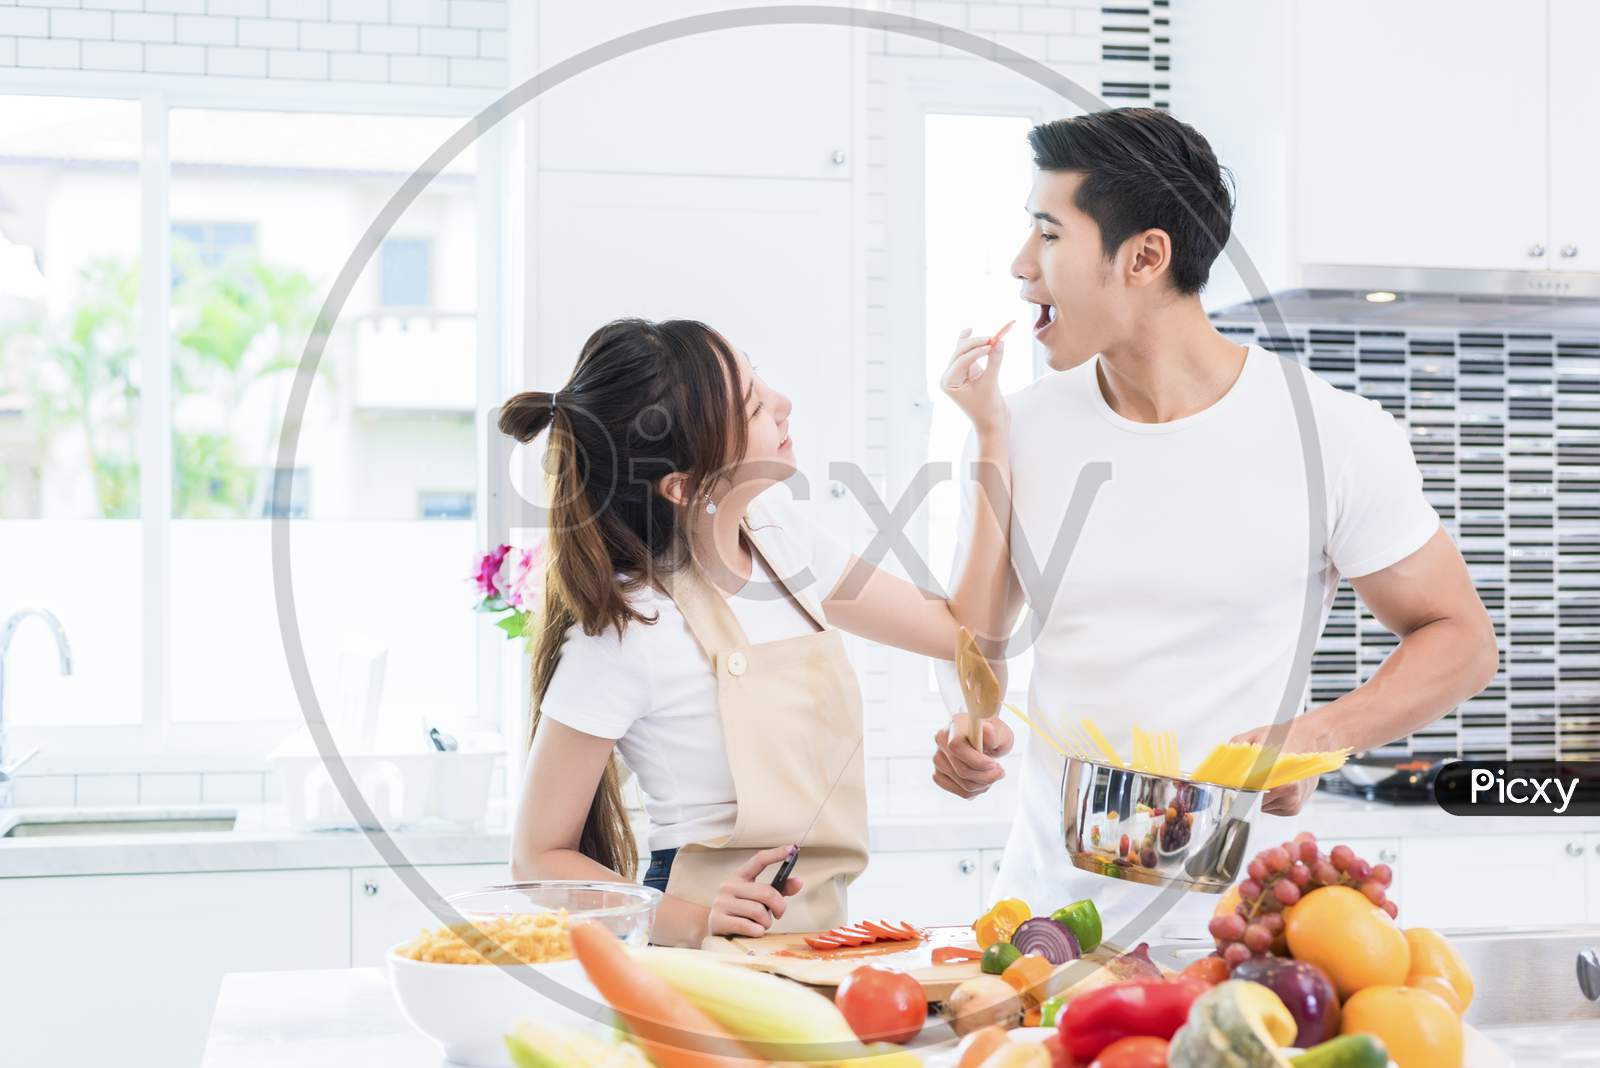 Asian Lovers Feeding Fruit And Food To Each Other, Couple And Family Concept. Honeymoon And Holidays Theme. Indoor Interior